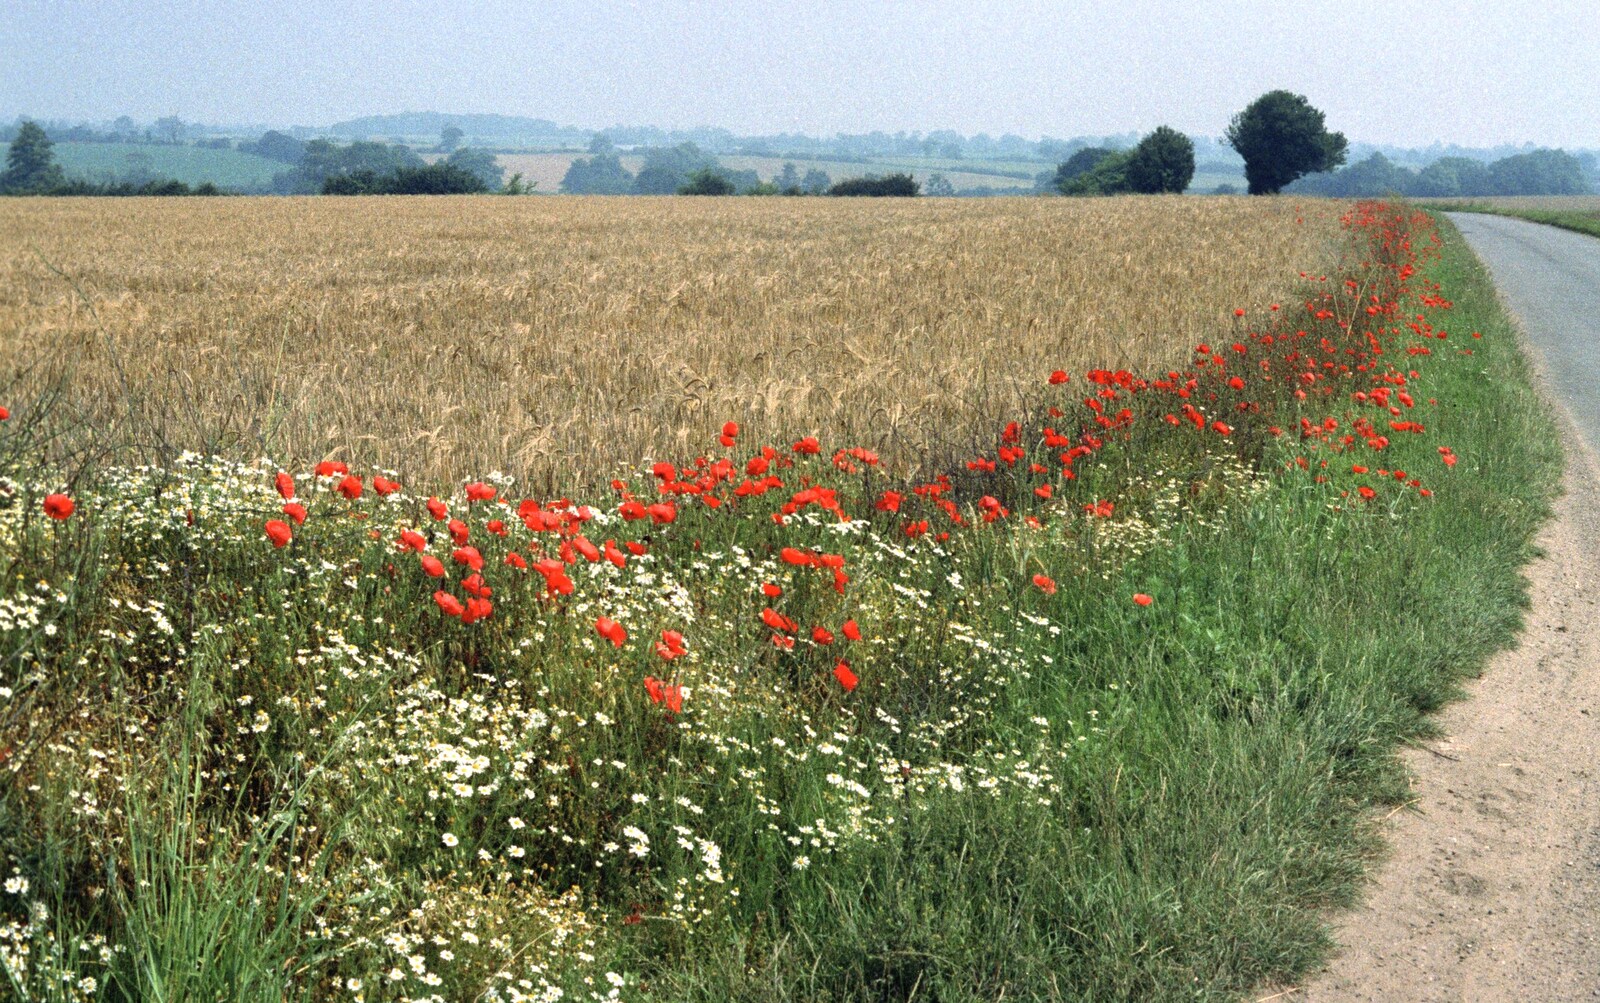 Poppies on the roadside from BSCC at the Beach, Walberswick, Suffolk - 15th July 1997